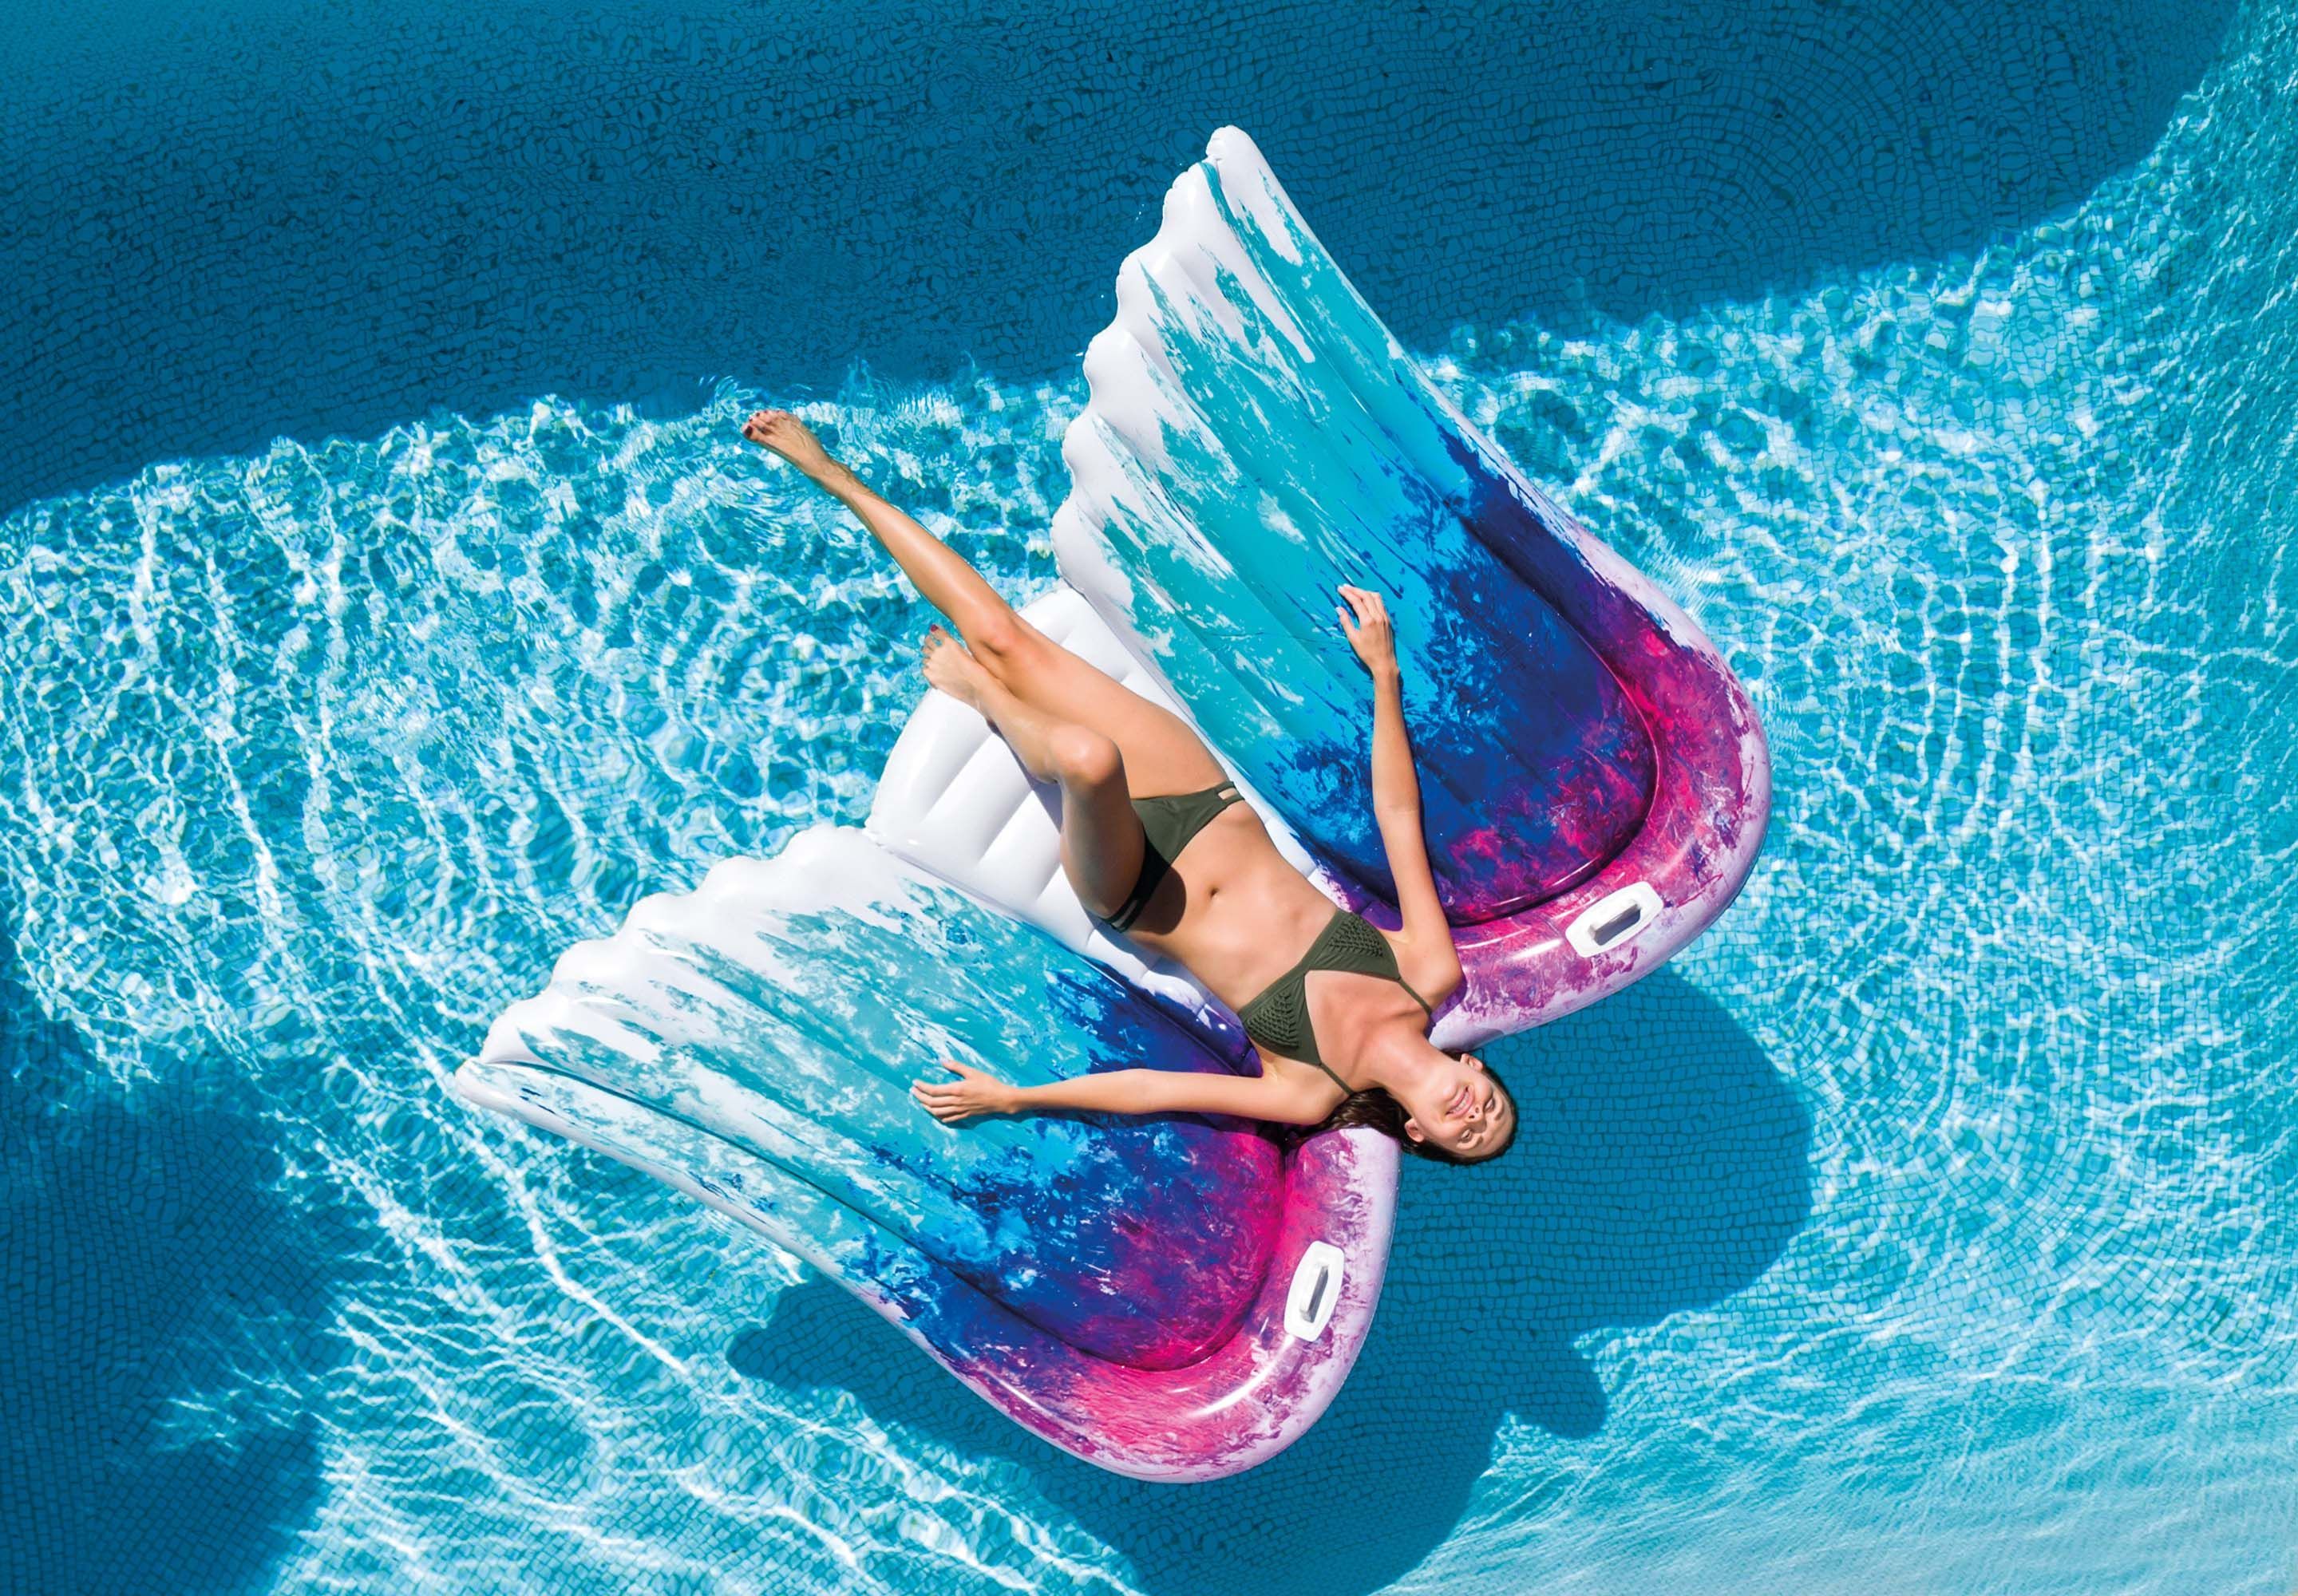 Fun Pool Float Lounge Chair with Angel Wings Pool Toys Raft floaties for Swimming Pool Party Summer Beach Lake River Floating Inflatable Pool Floats Adult Size 